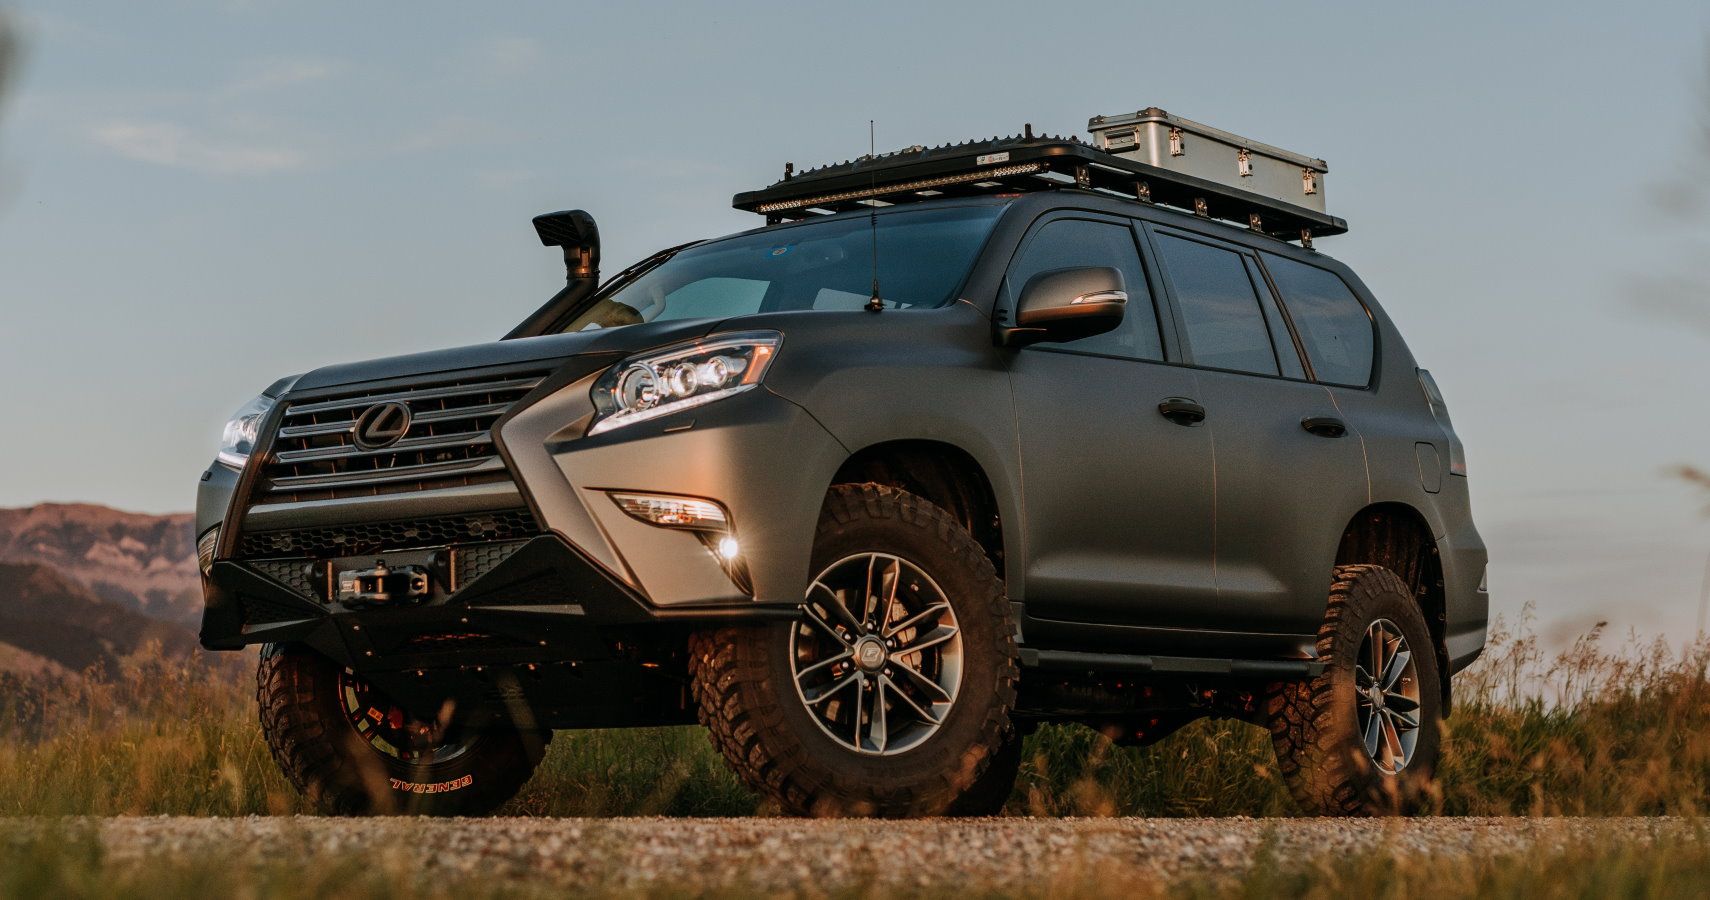 Lexus Makes An Uncharacteristic Off-Road SUV Concept